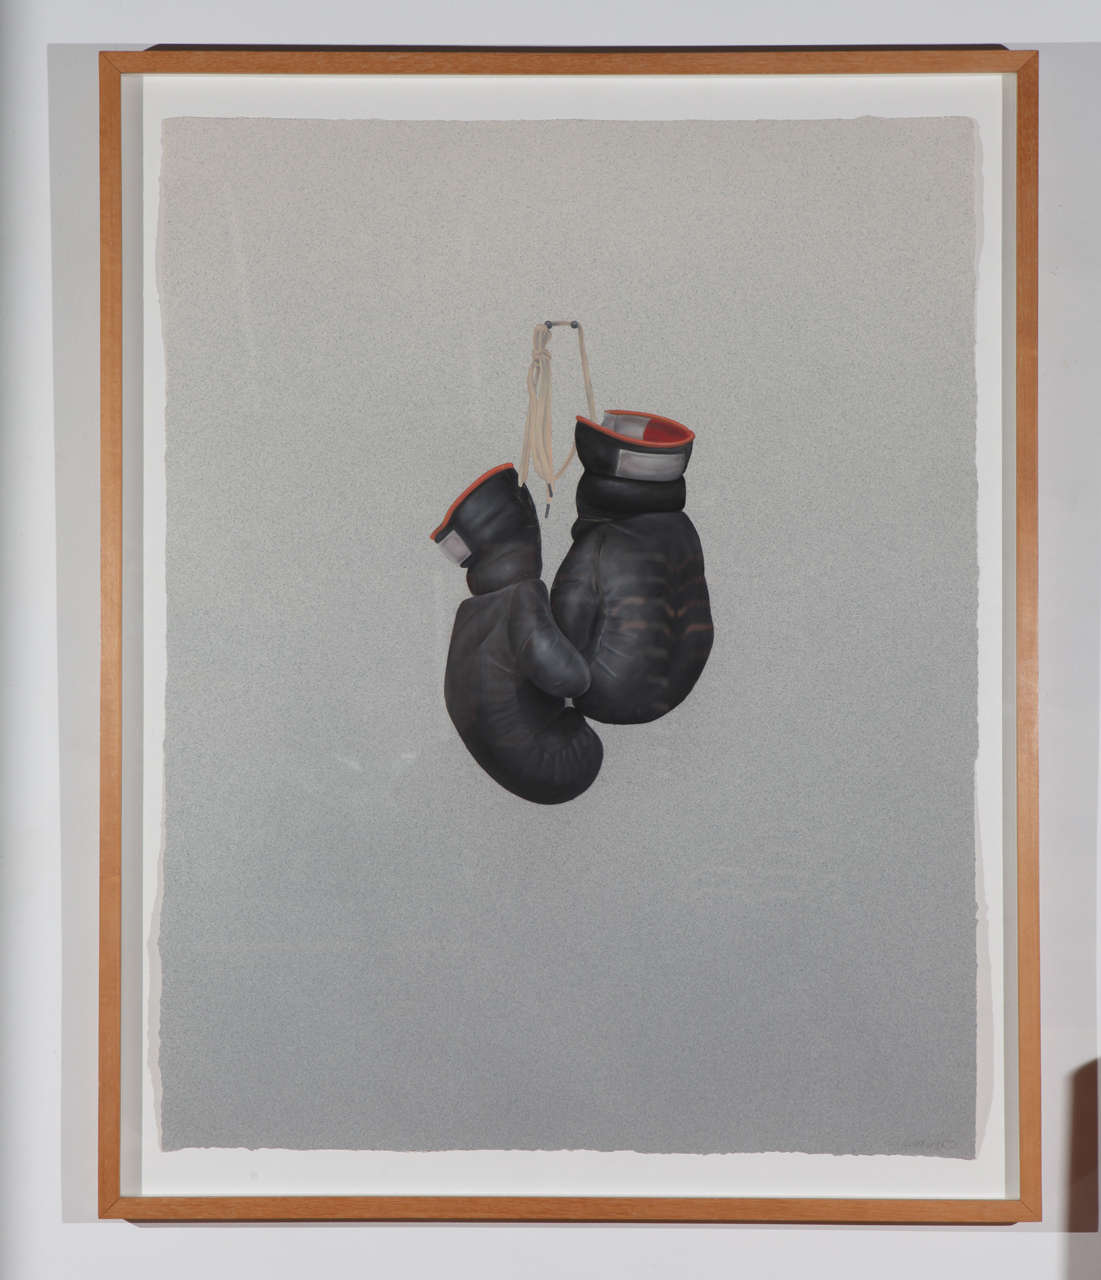 Most famous boxing gloves photo.  Signed and dated by Bruce Richards,(American, born 1948).  Frame is 33